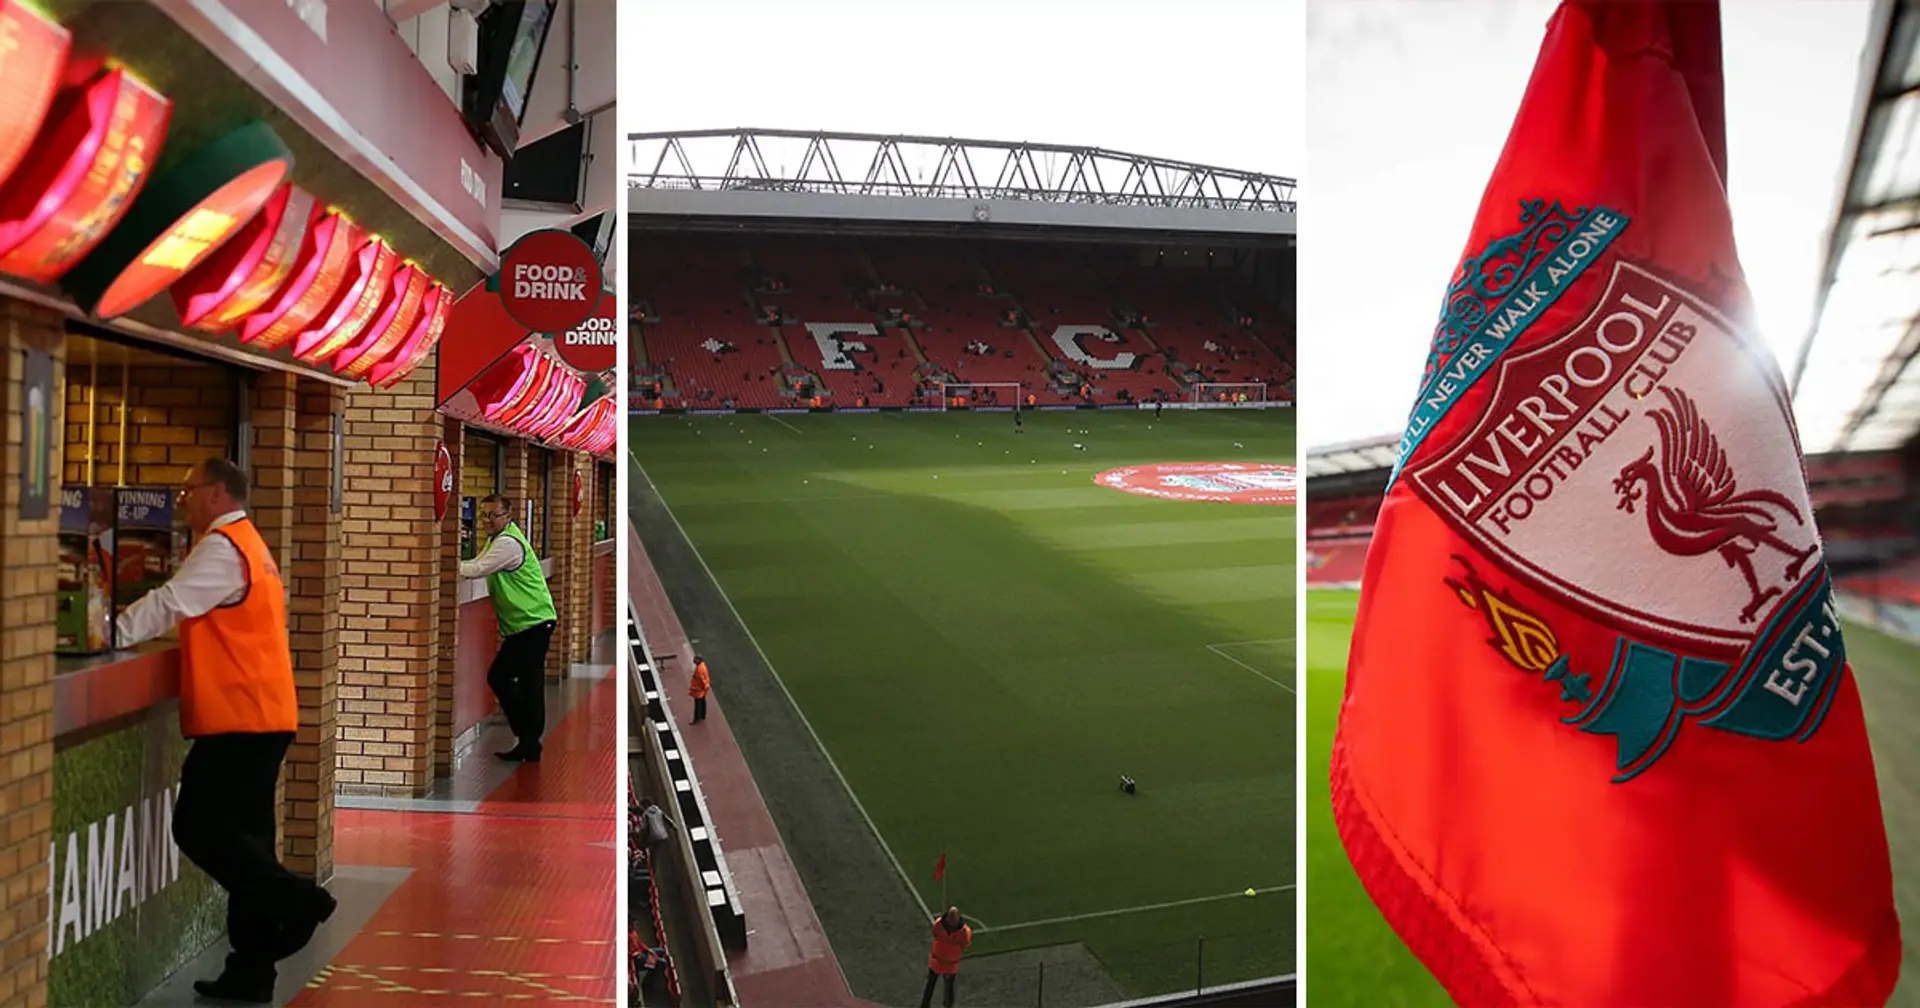 Premier League stadiums ranked according to visitors experience, you'd be surprised to see where Anfield is!